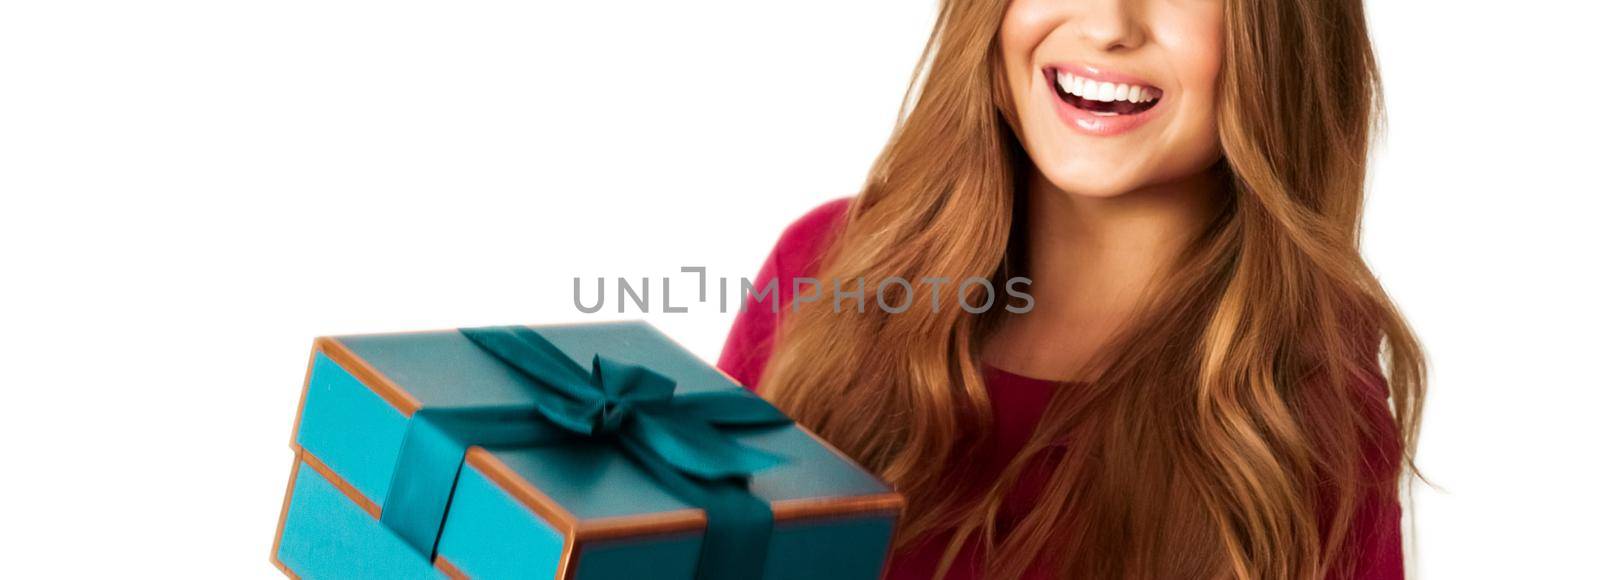 Birthday, Christmas or holiday present, happy woman holding a green gift or luxury beauty box subscription delivery isolated on white background, portrait